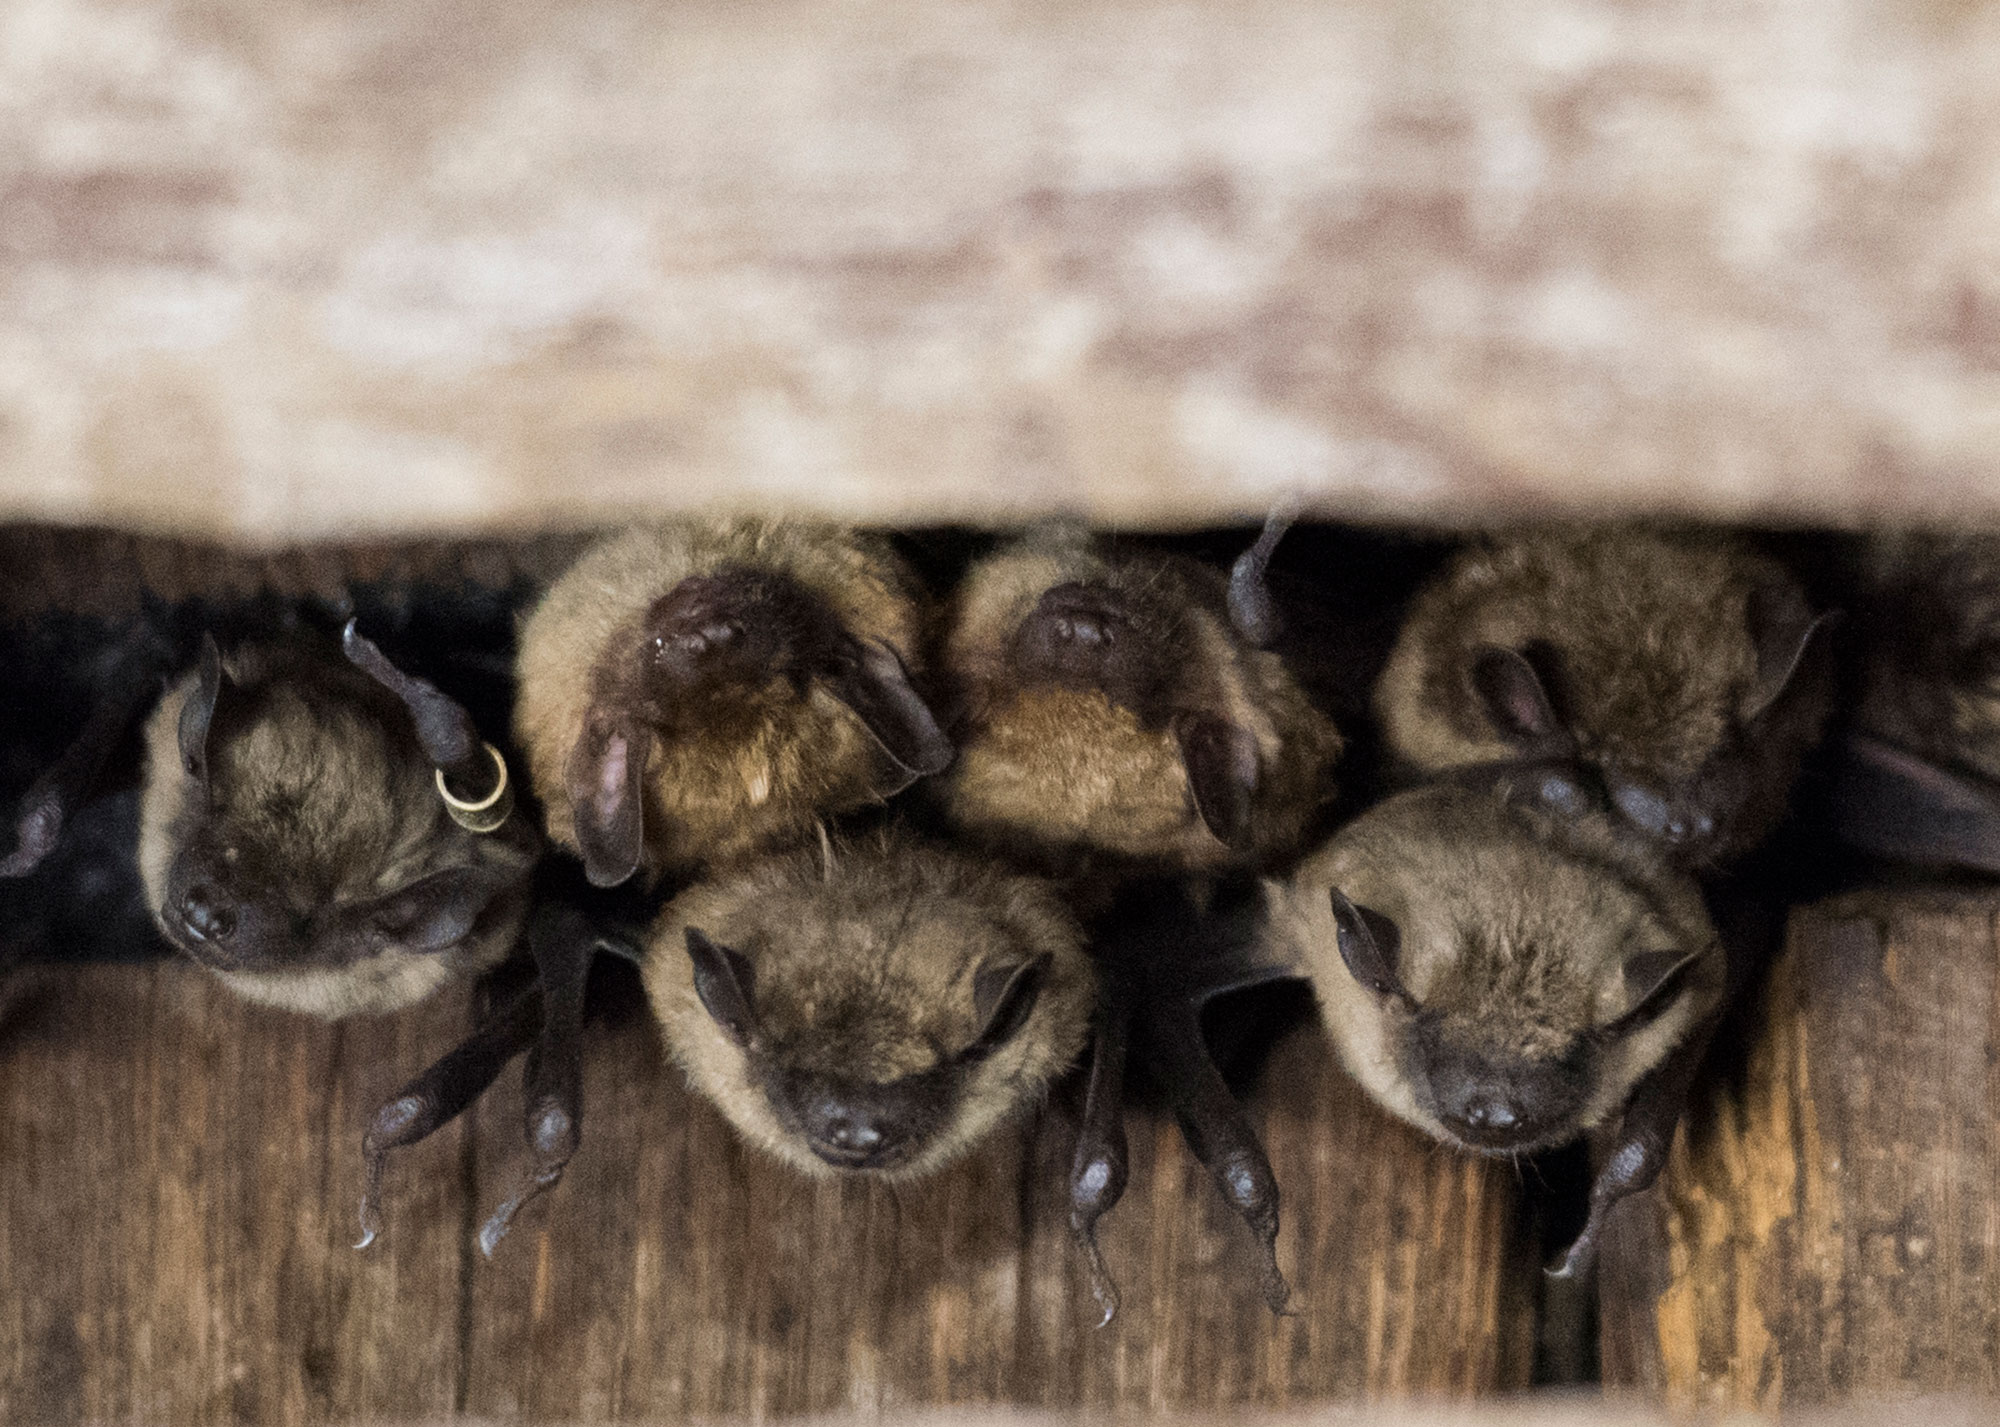 A group of big brown bats roosting in a wooden structure.